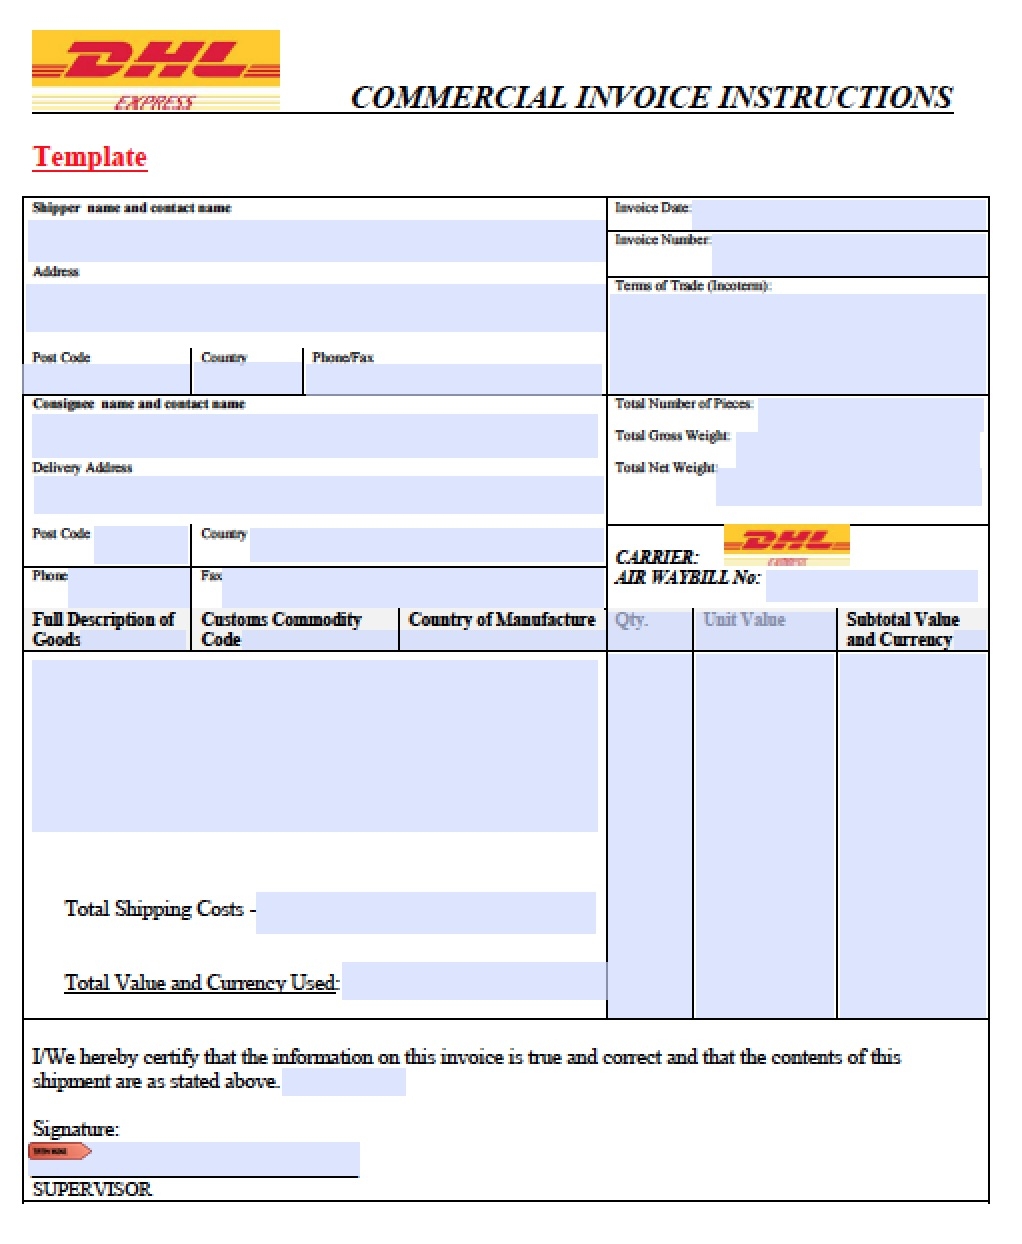 canada commercial invoice free dhl commercial invoice template excel pdf word doc 1022 X 1244